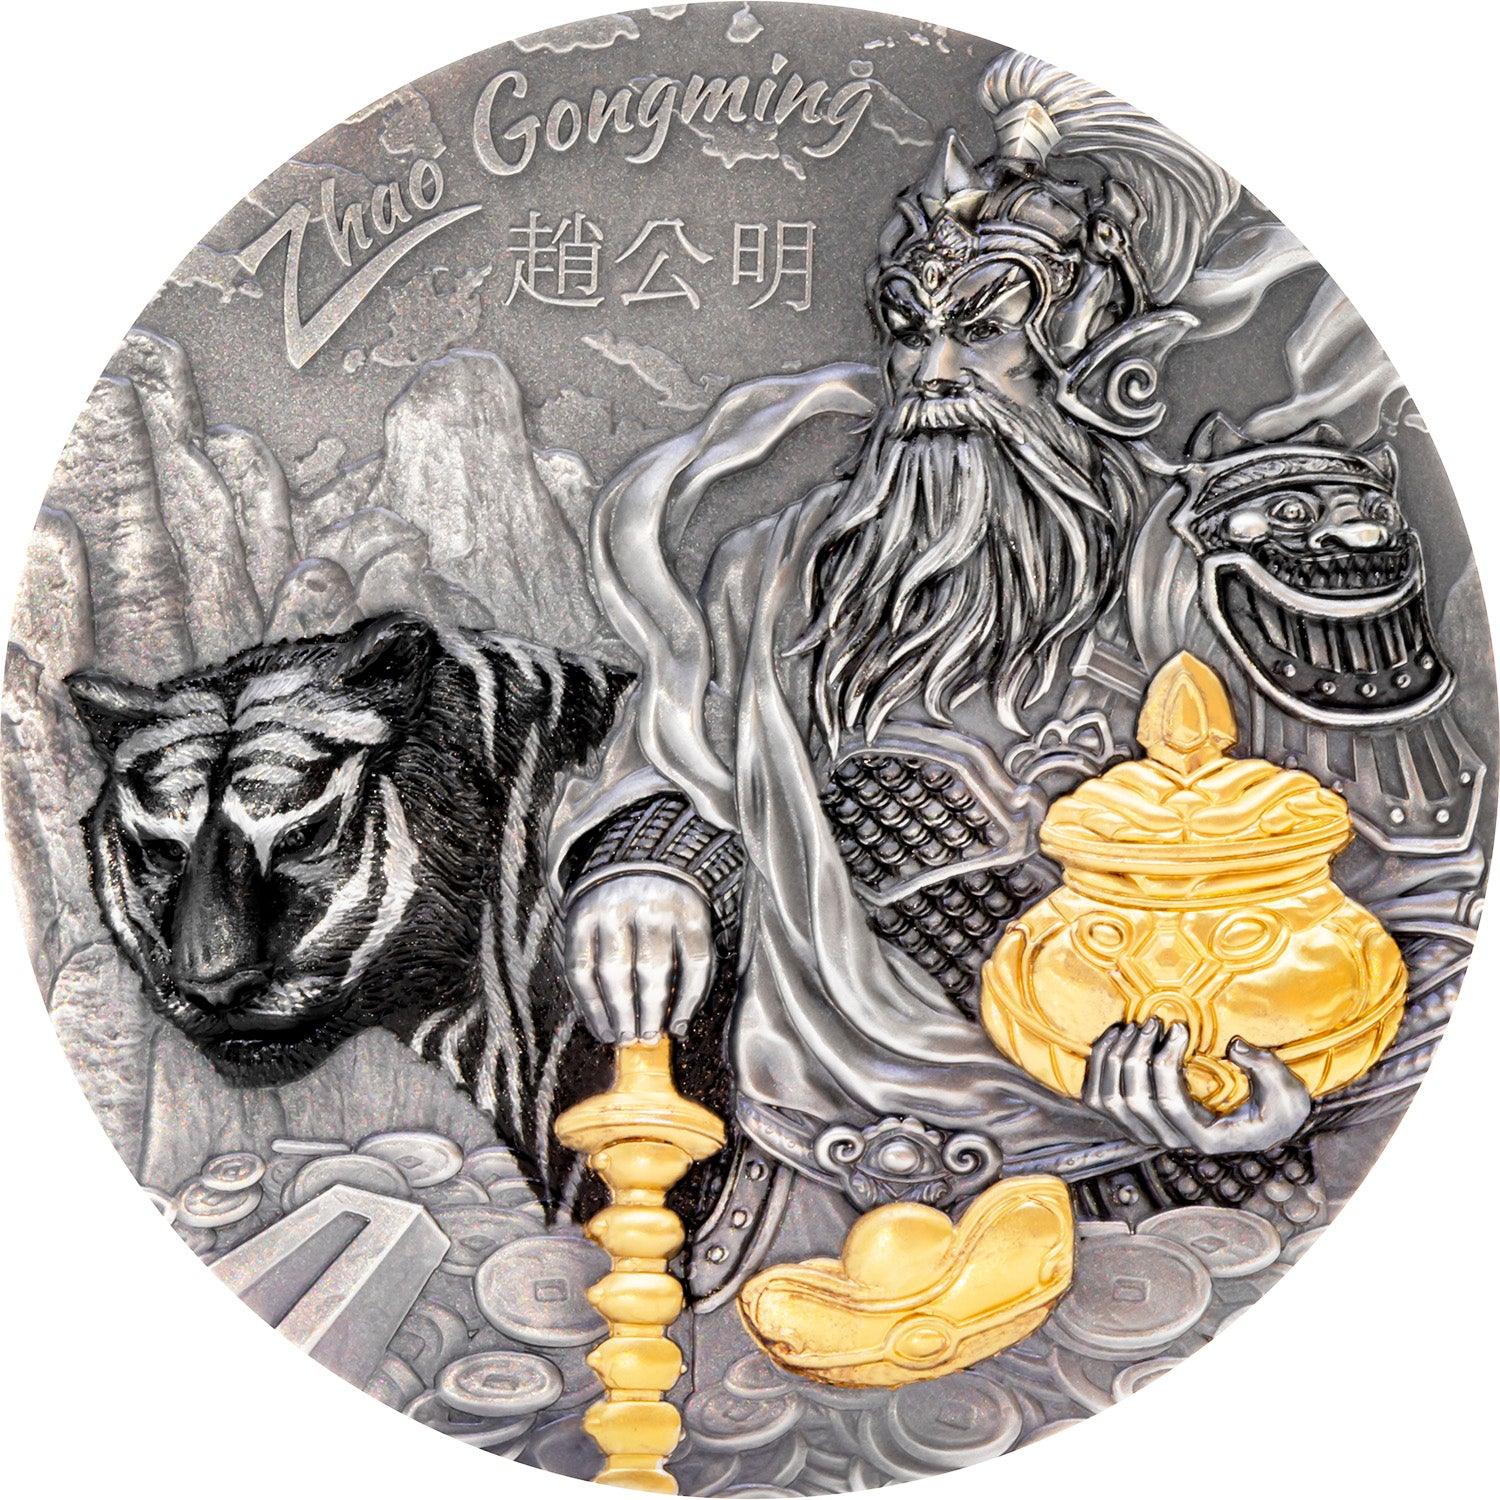 ZHAO GONGMING Gilded Asian Mythology 3 Oz Silver Coin 20$ Cook Islands 2021 - PARTHAVA COIN